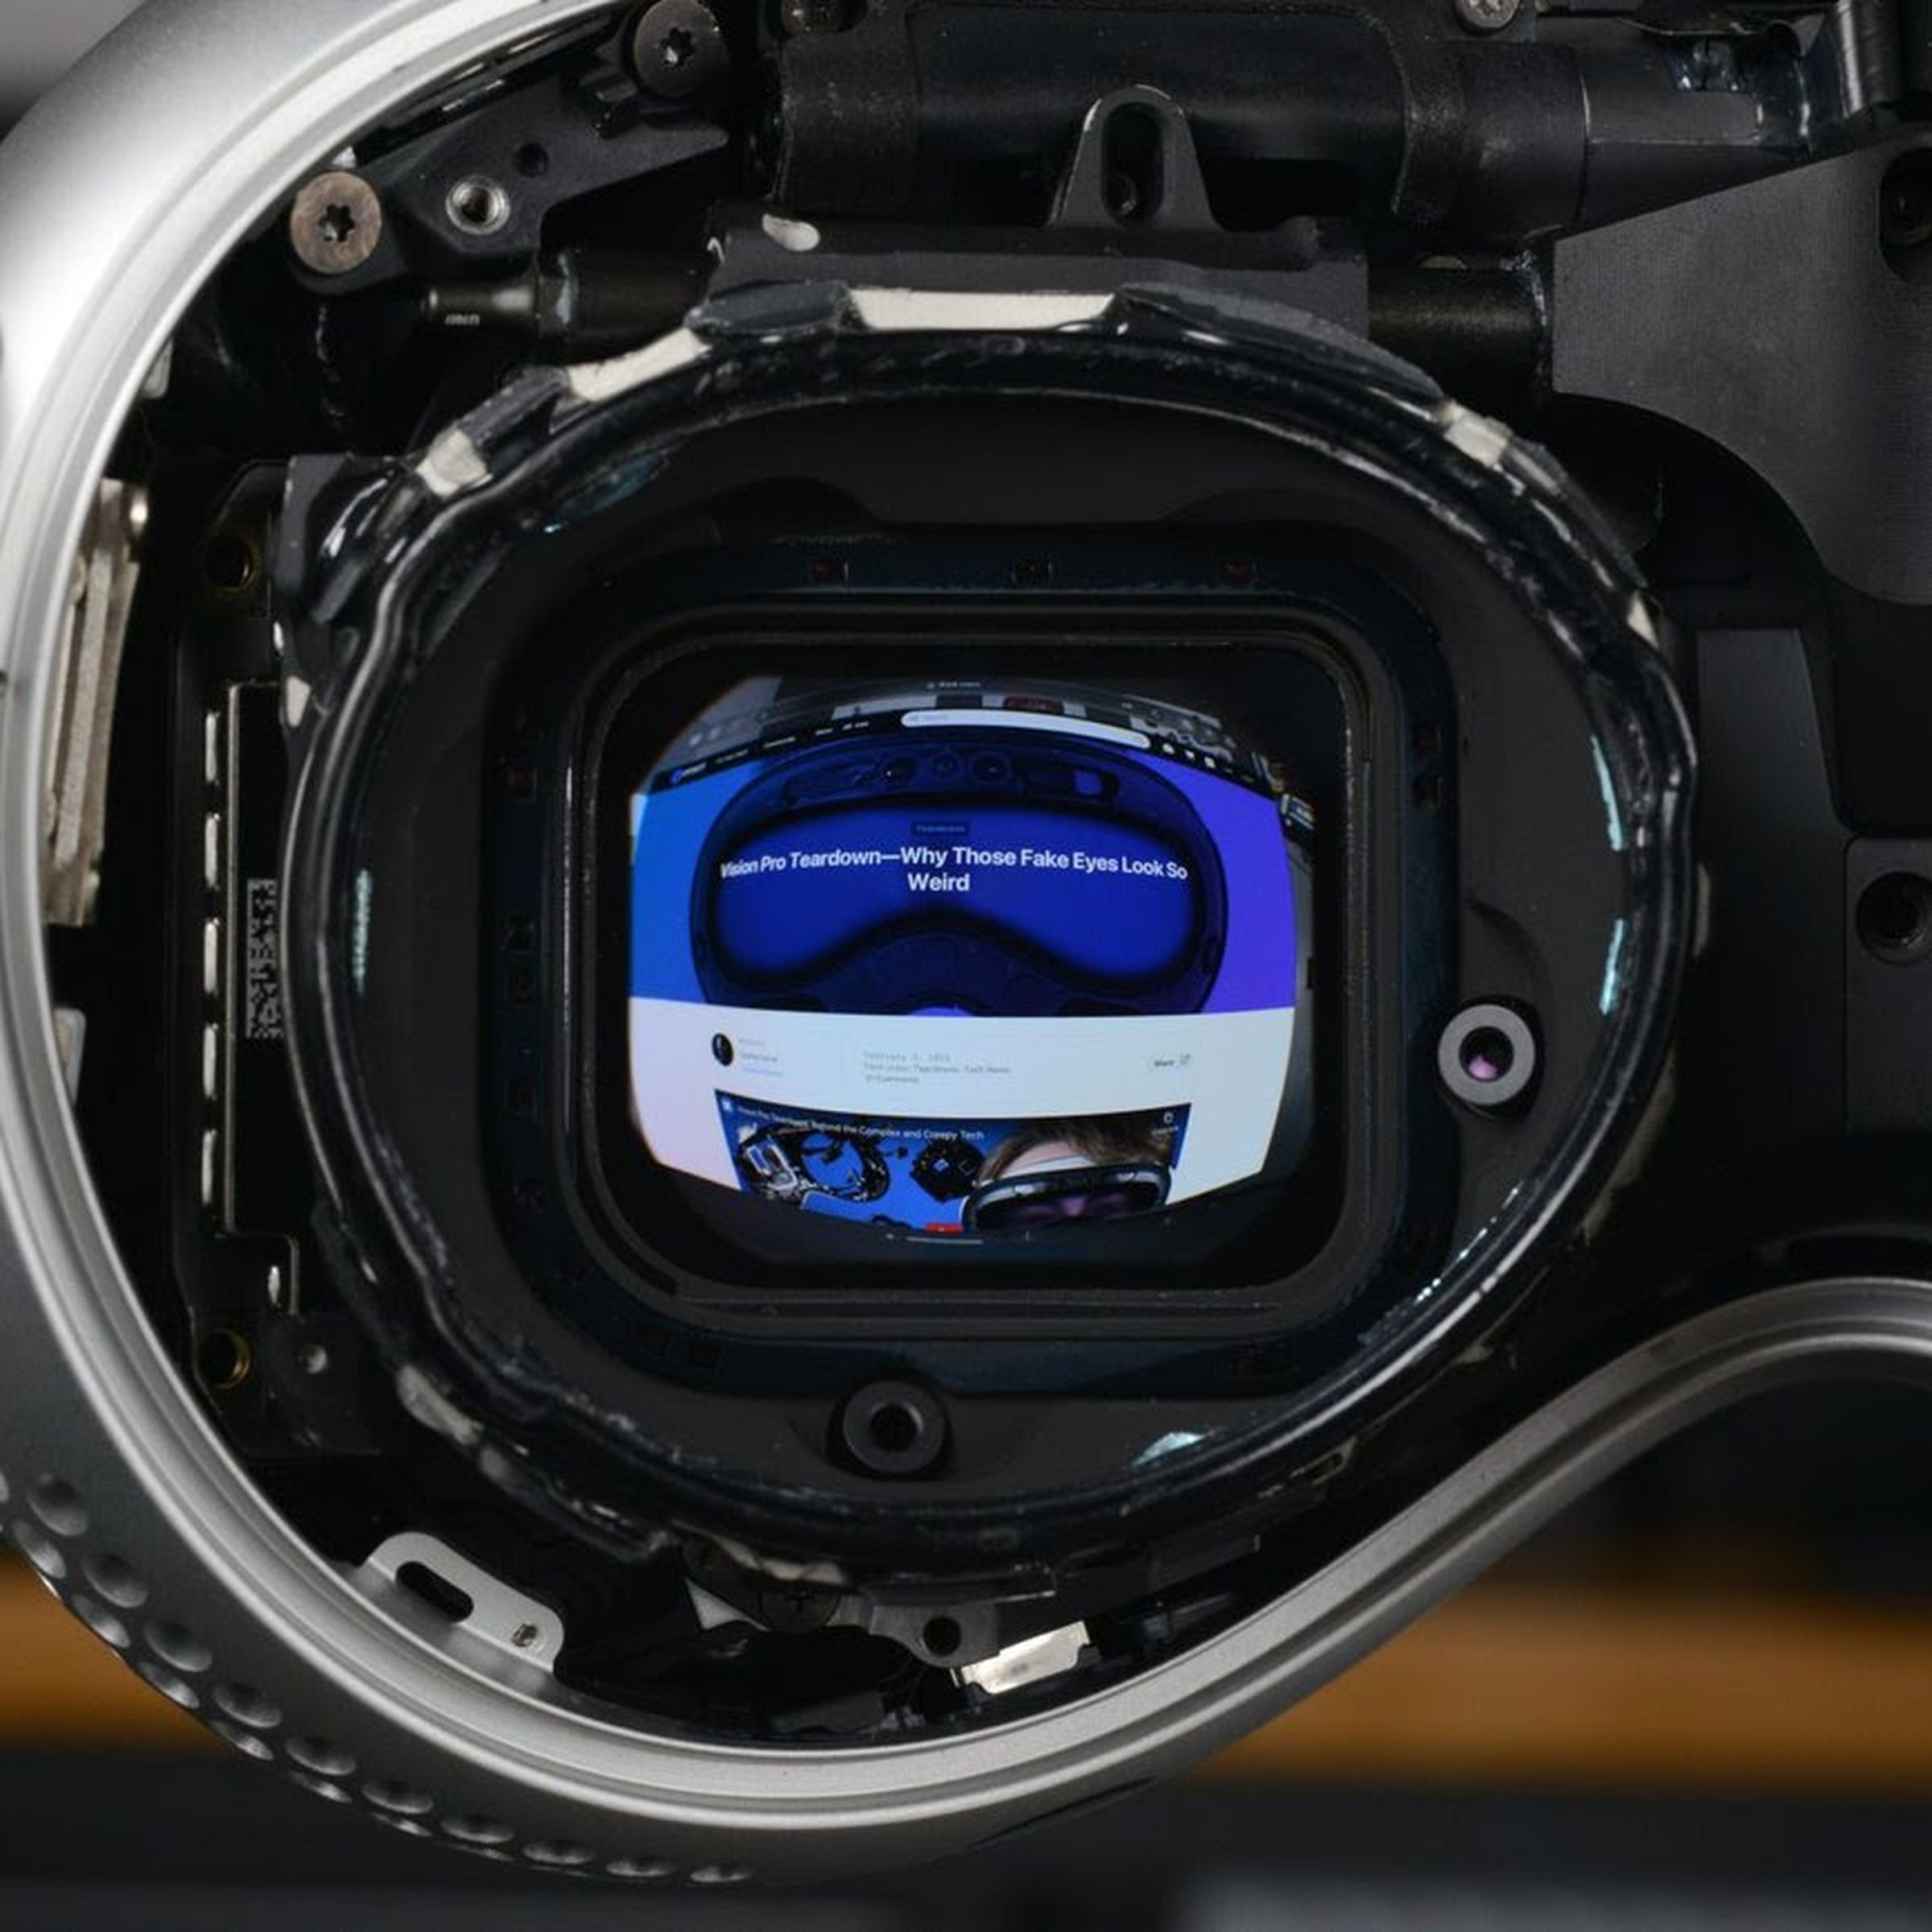 A close look at the left eye display of a Vision Pro headset with several parts removed.